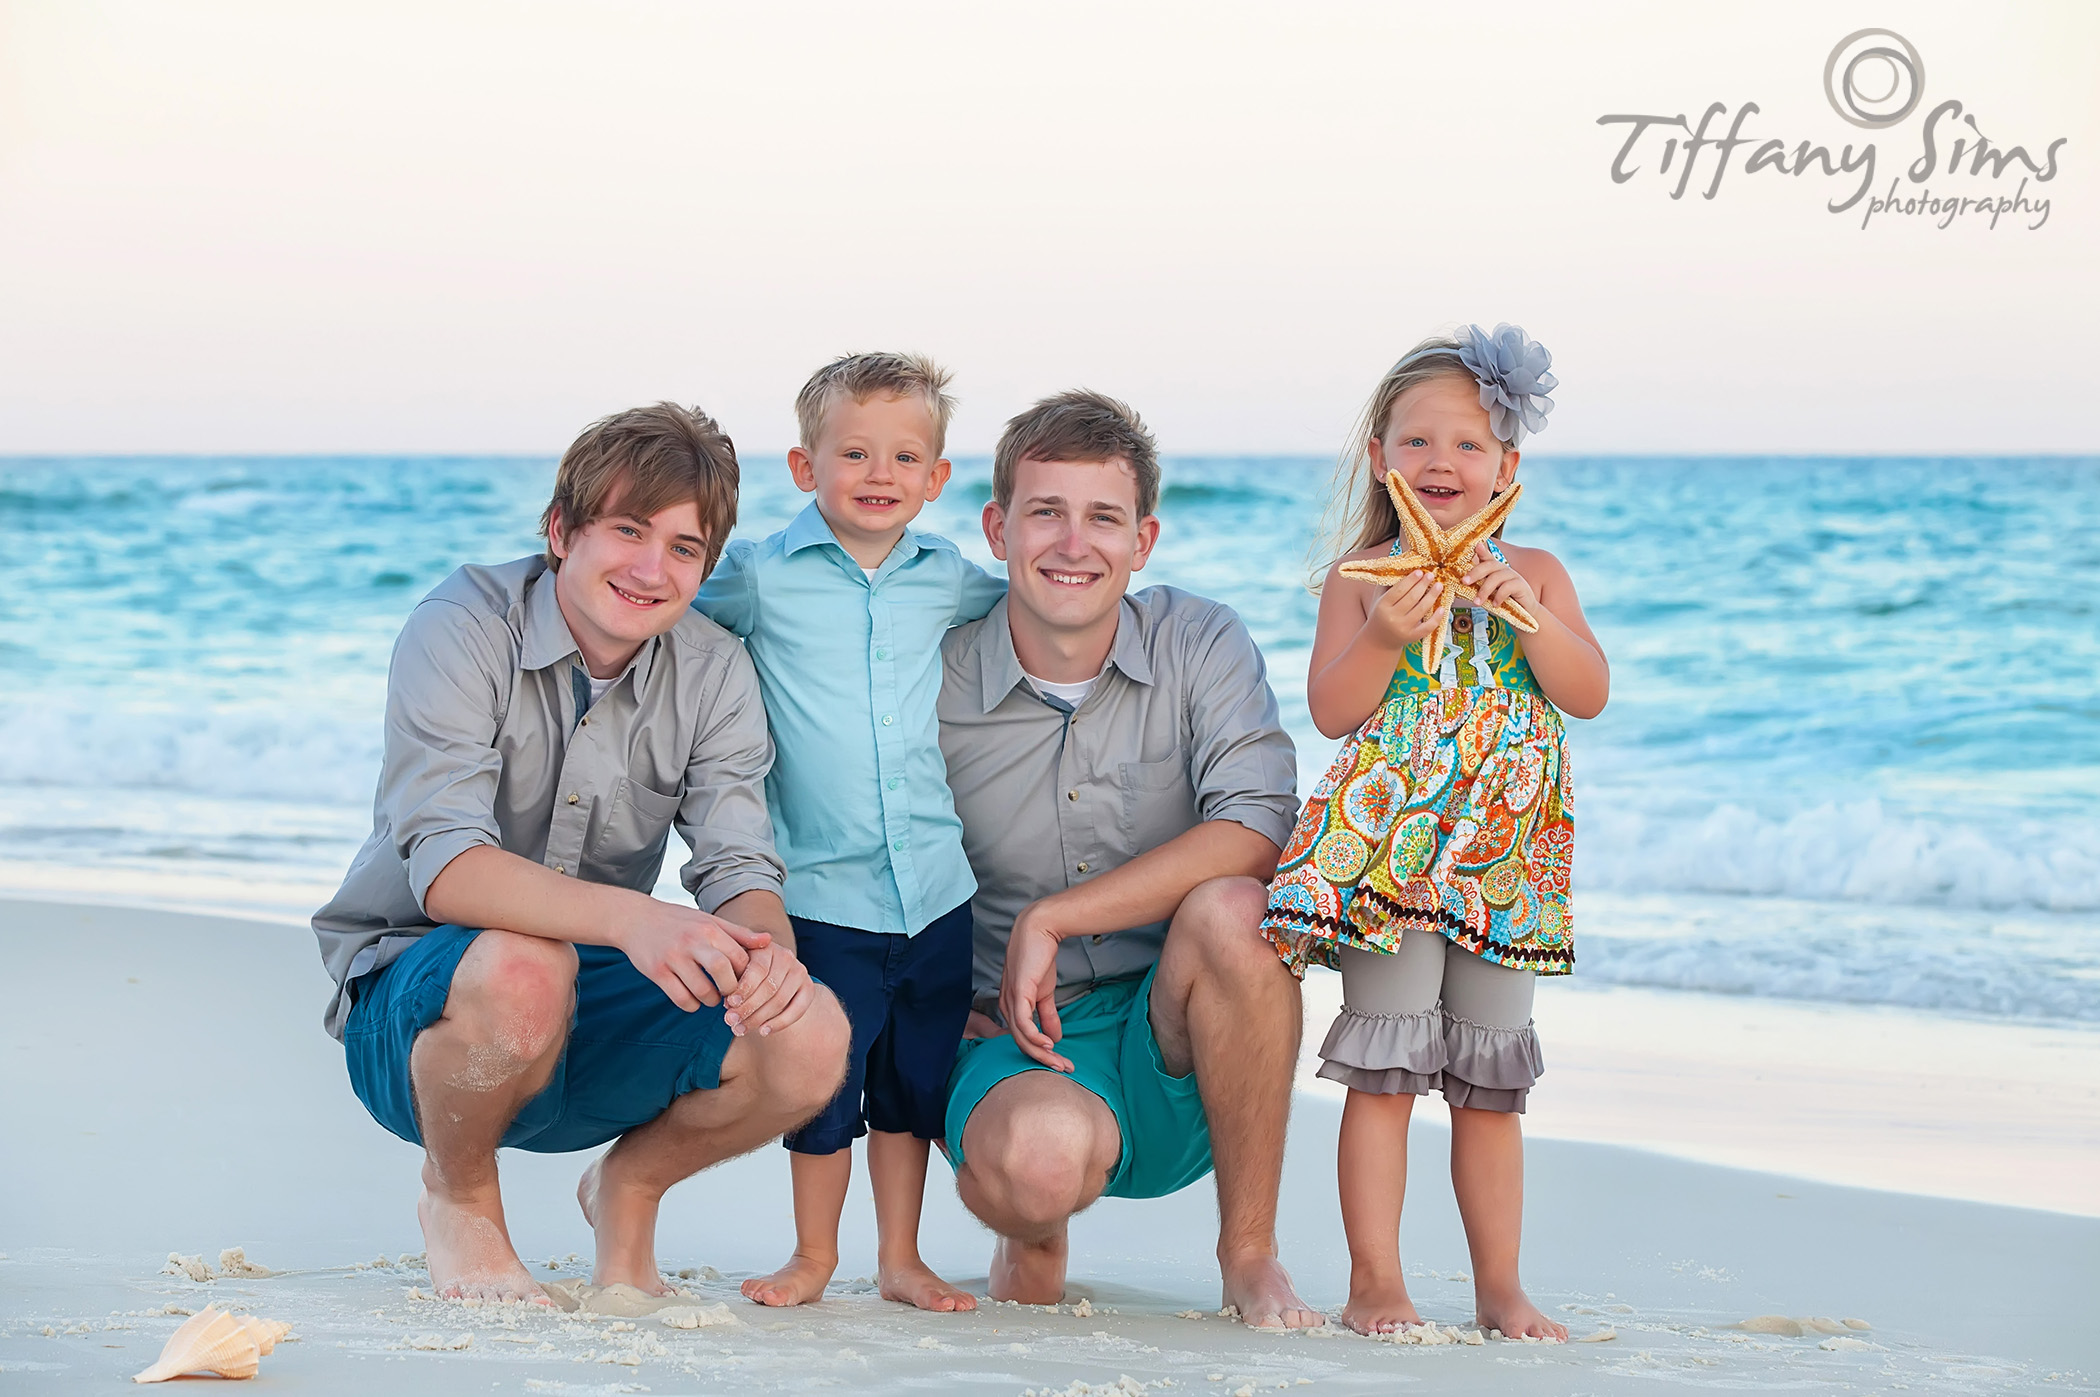 Destin Photography by Tiffany Sims Photography #destin #destinphotography #destinbeachphotography #30aphotography #30abeachphotography #destinphotographer #30aphotographer #fortwaltonbeachphotography #okaloosaislandphotography | IMG_9604srw